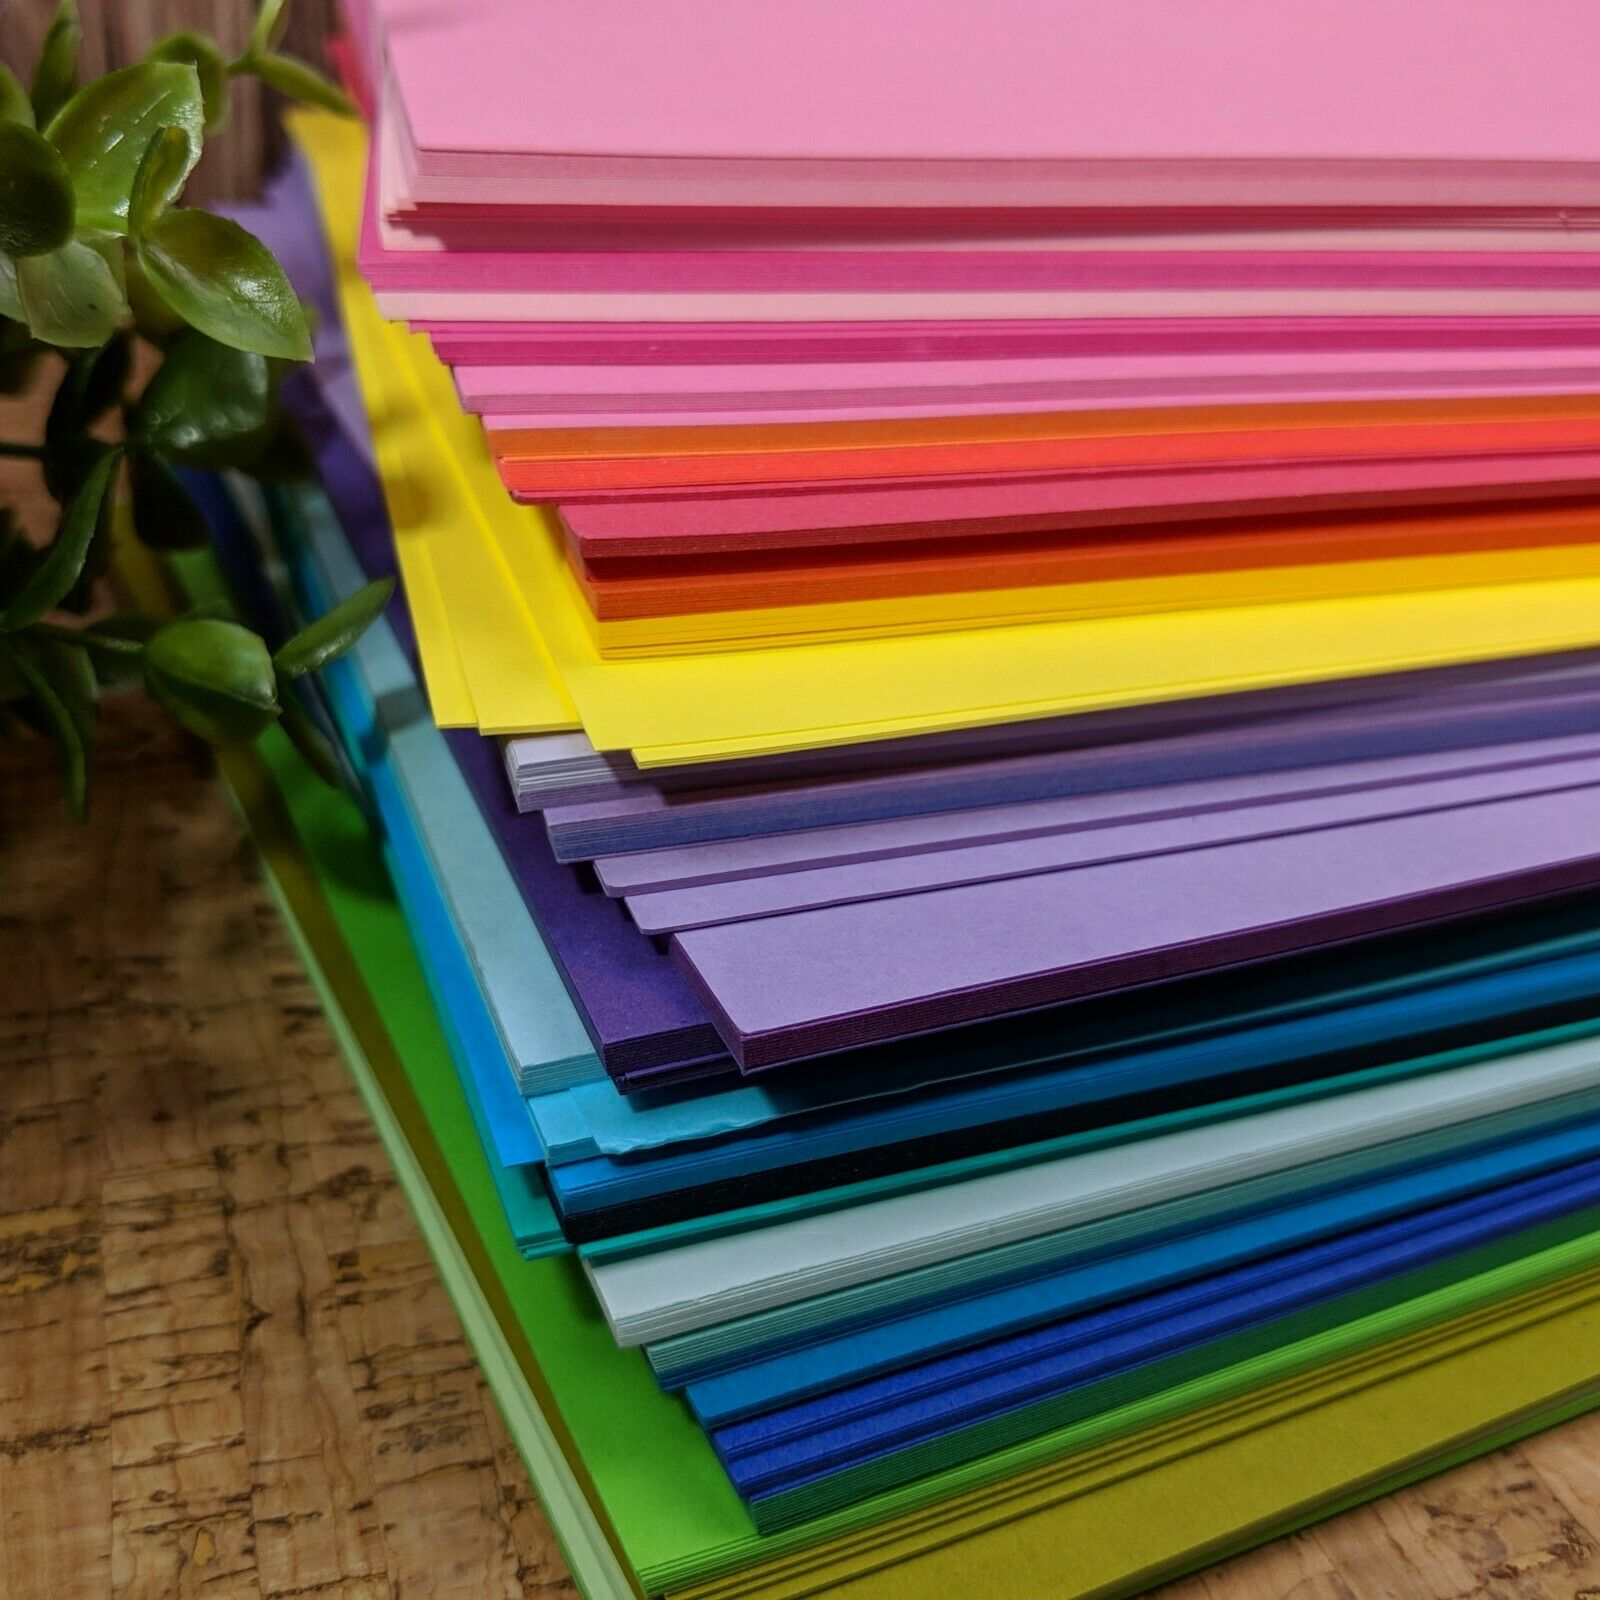 Premium 8.5" X 11" Cardstock Paper Color Paper - Over 50 Colors - Free Shipping